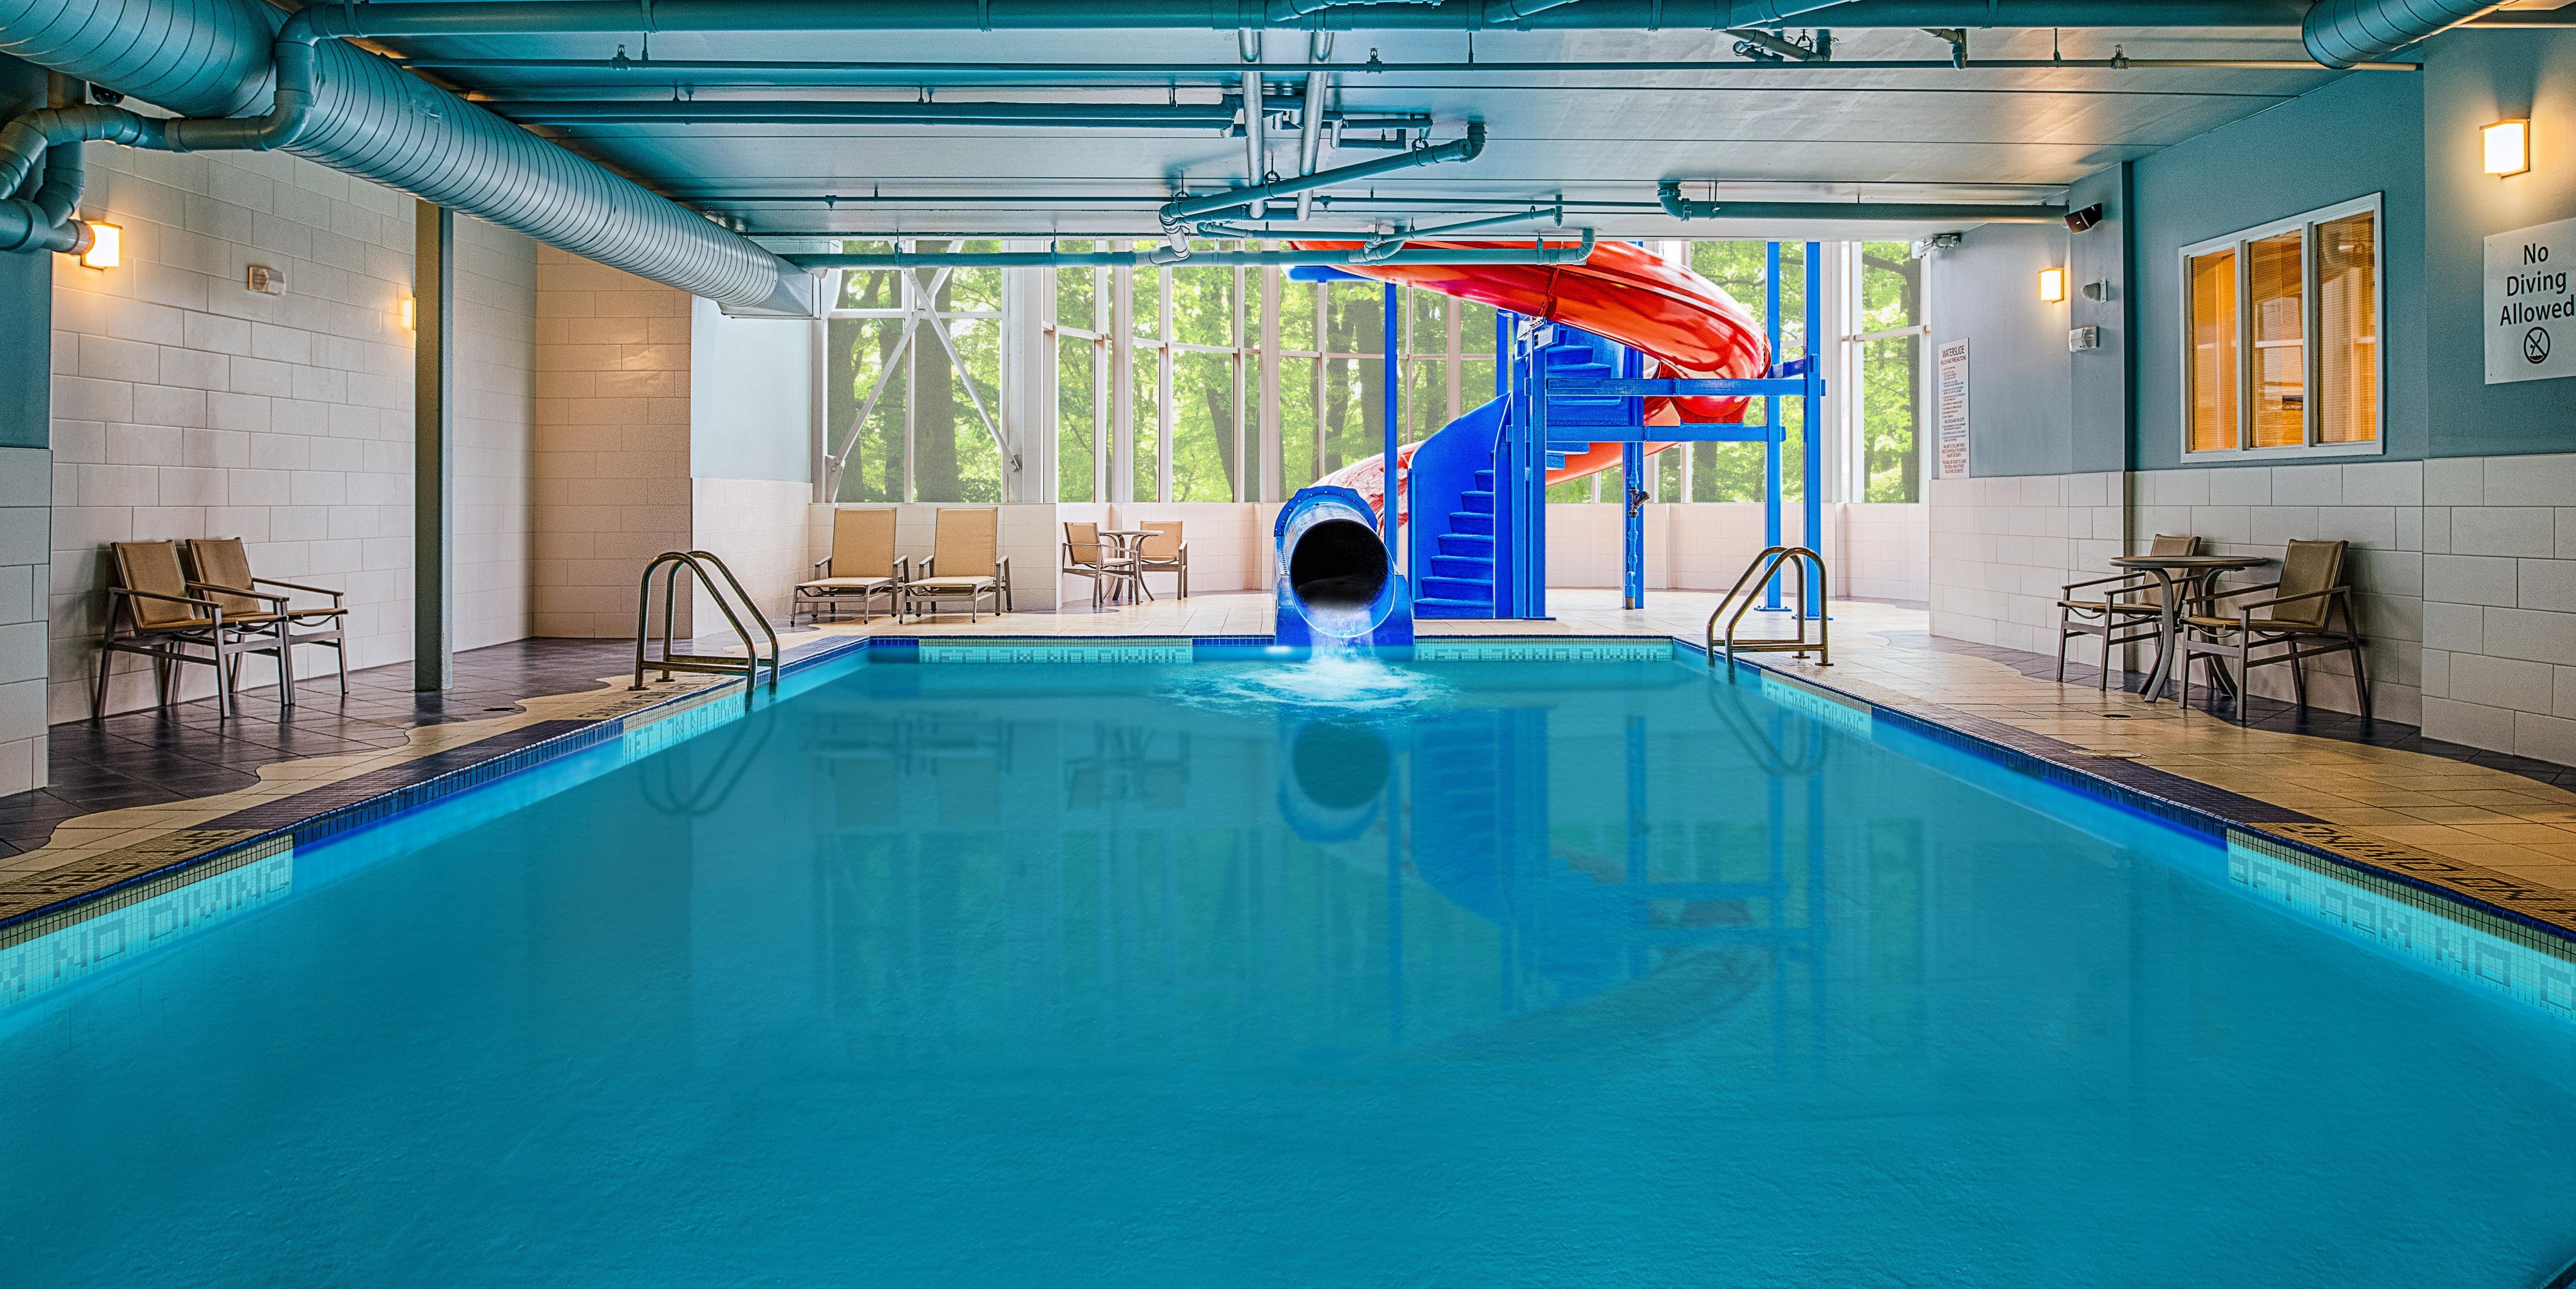 Take the plunge down the thrilling waterslide and into our refreshing indoor pool. Whether you're looking for a leisurely dip or aiming to clock in a few laps, our heated pool is the perfect aquatic oasis. After a long day of business meetings or exploring Halifax, unwind by making a splash!